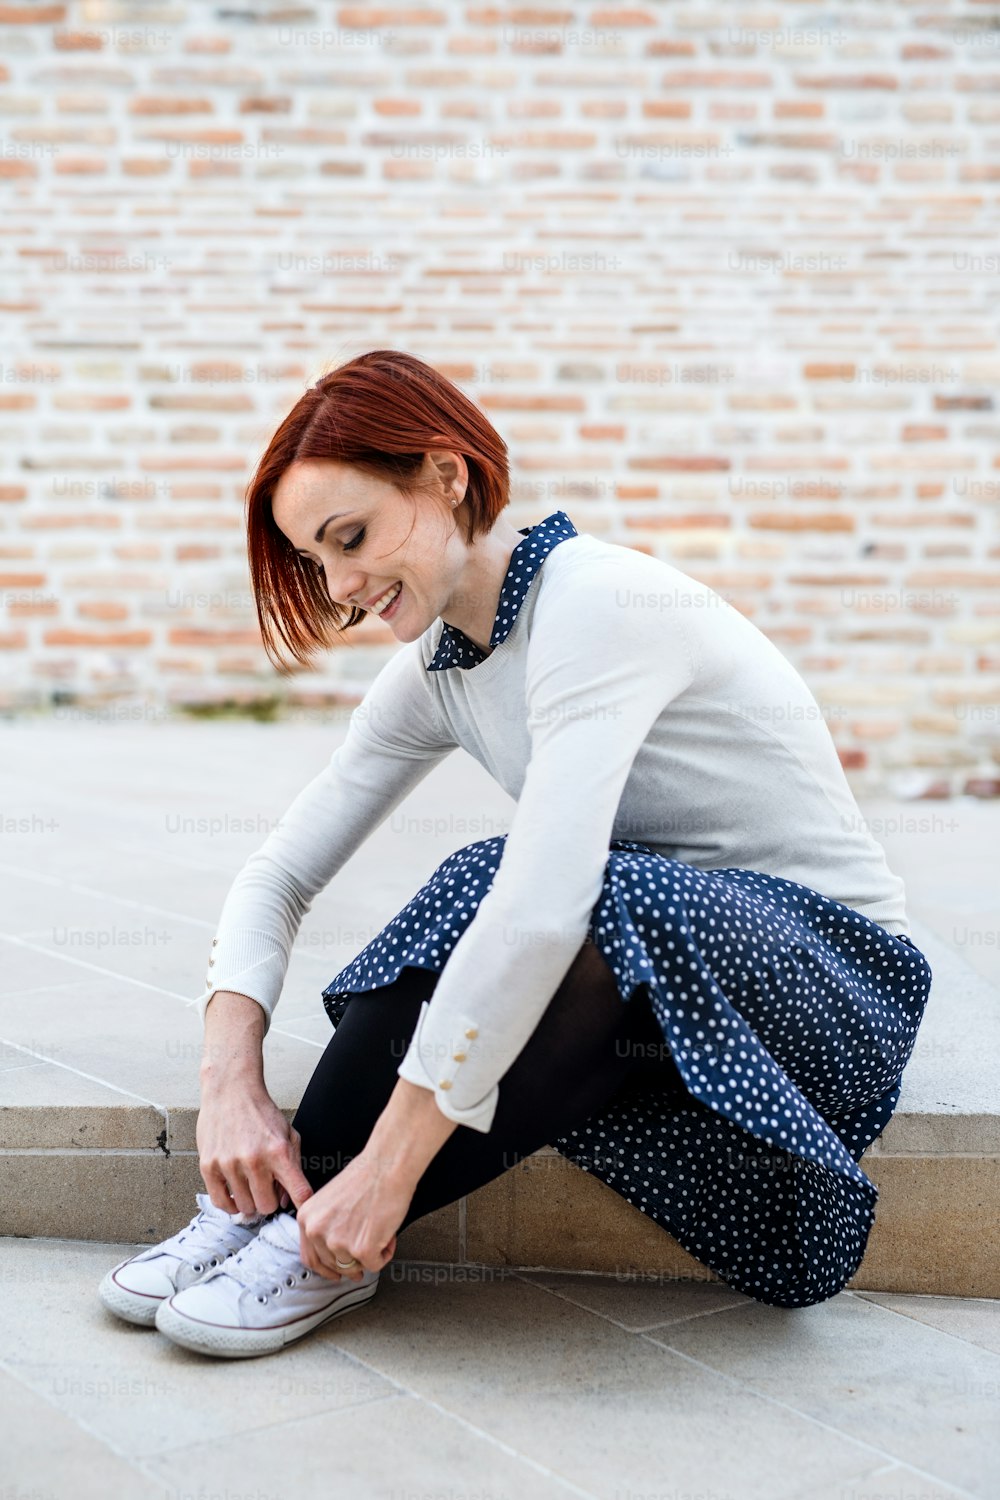 A portrait of young business woman sitting outdoors, tying shoelaces. Start-up concept.